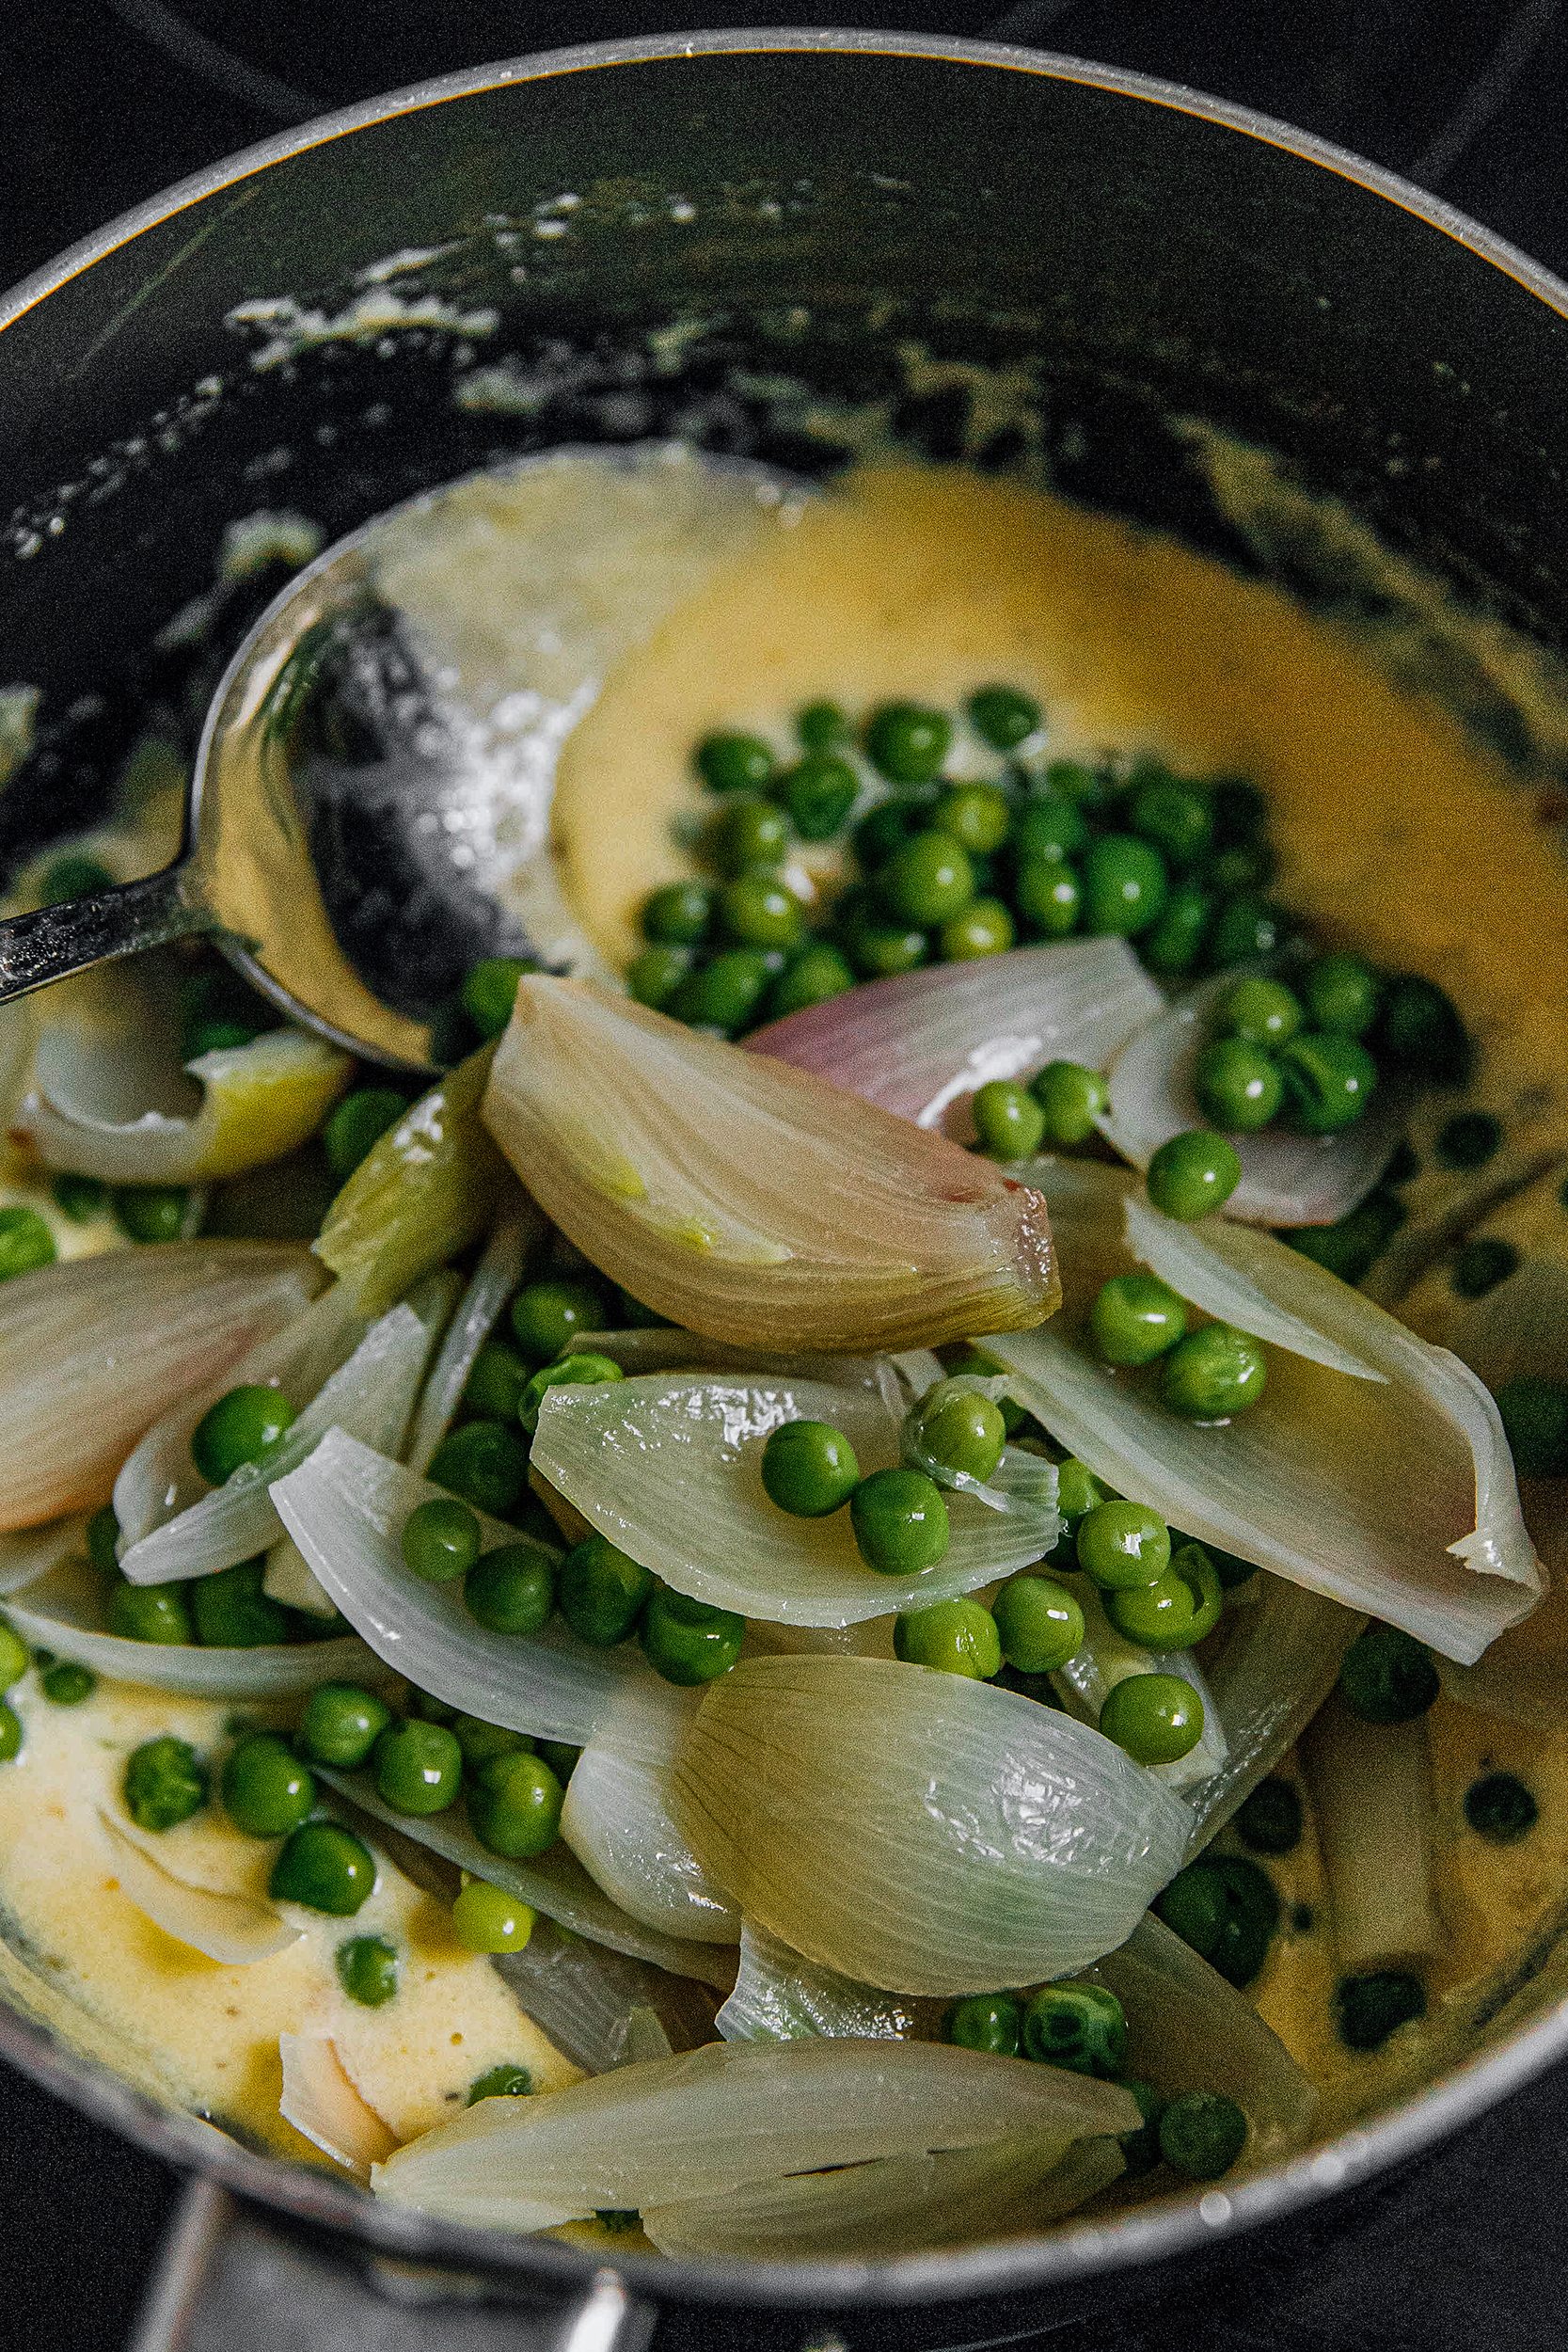 Add onions and peas back into saucepan and stir into the sauce to coat. Serve immediately.